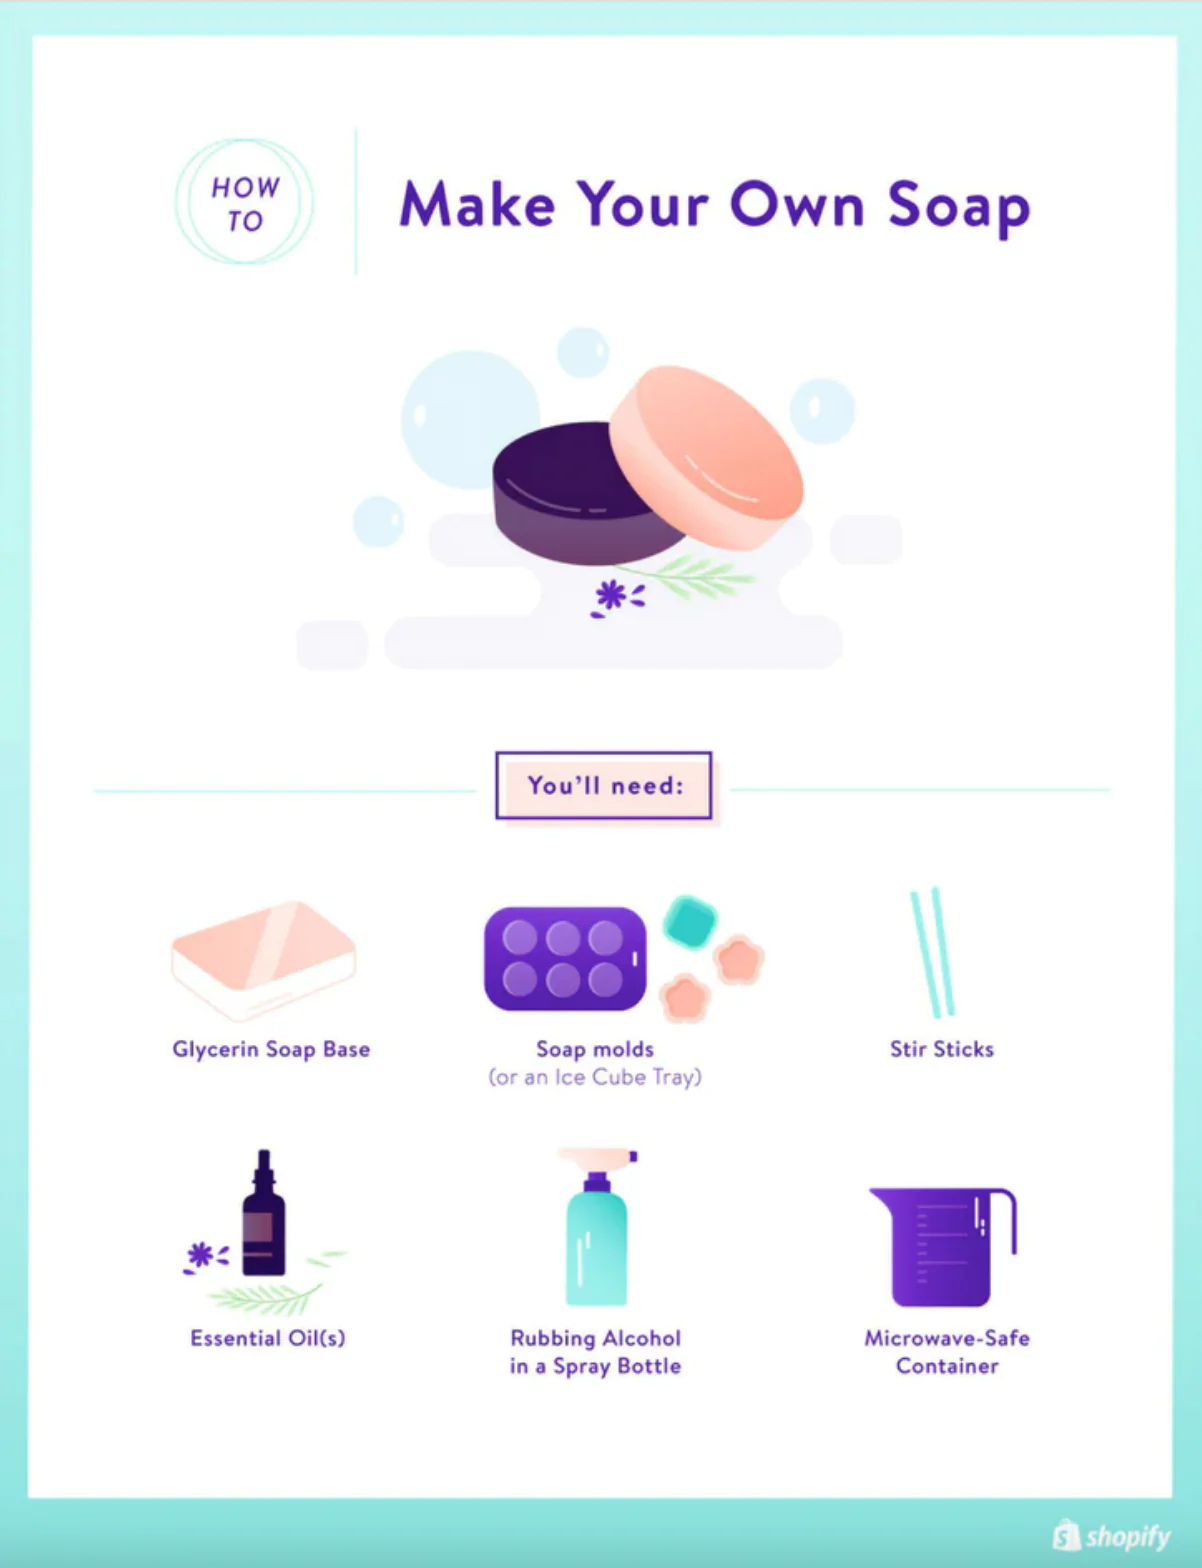 Illustration showing the ingredients and materials needed to make soap